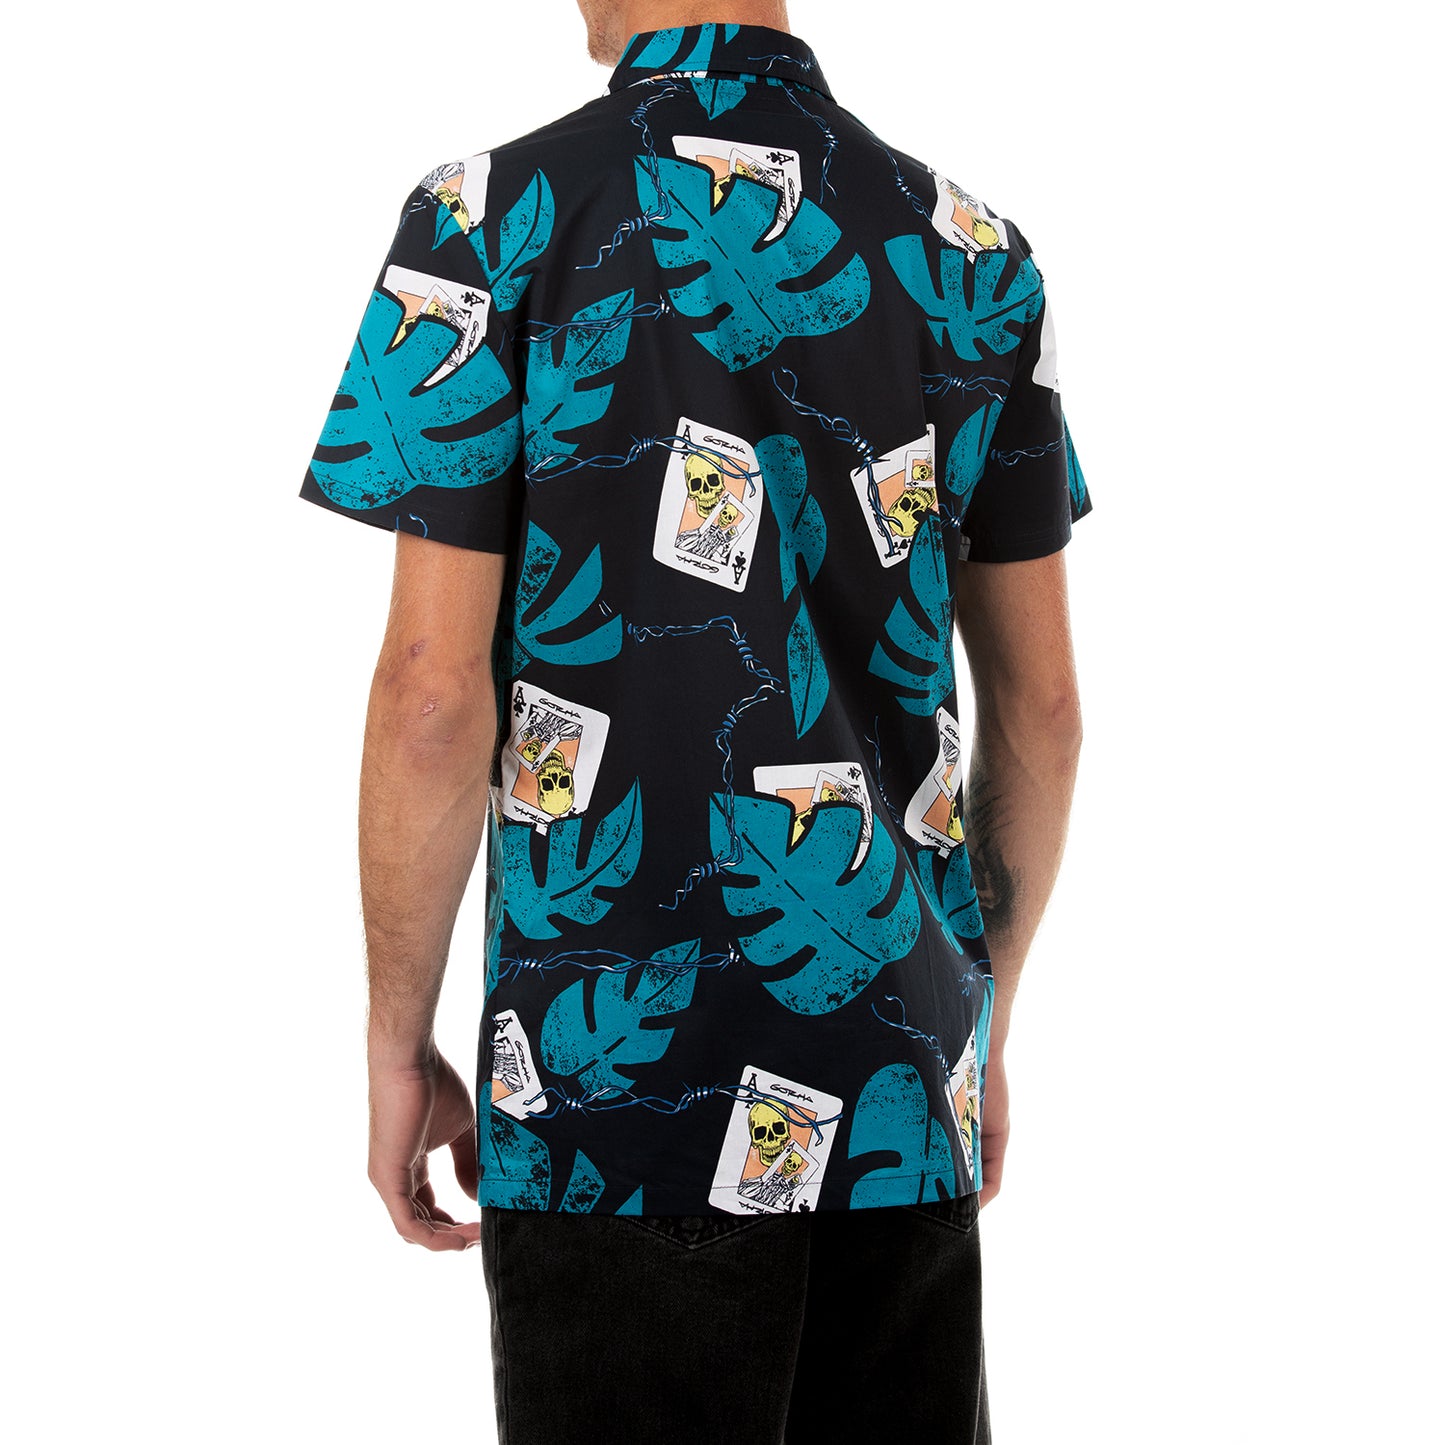 Men’s Cotton Viscose Shirt with Turquoise Leaf and Card Design - Deal